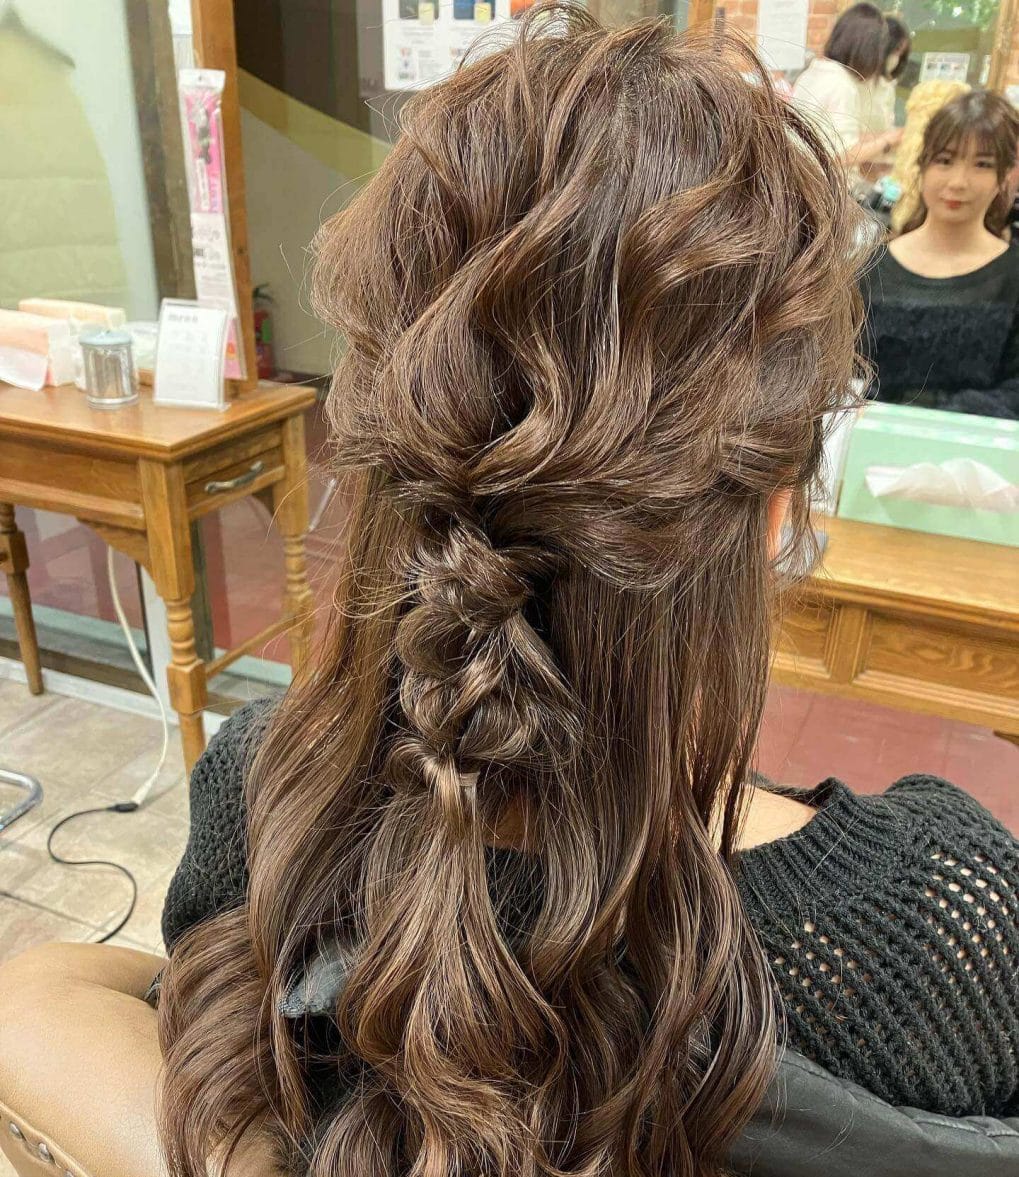 Caramel-toned braid flows into a full, textured hairstyle